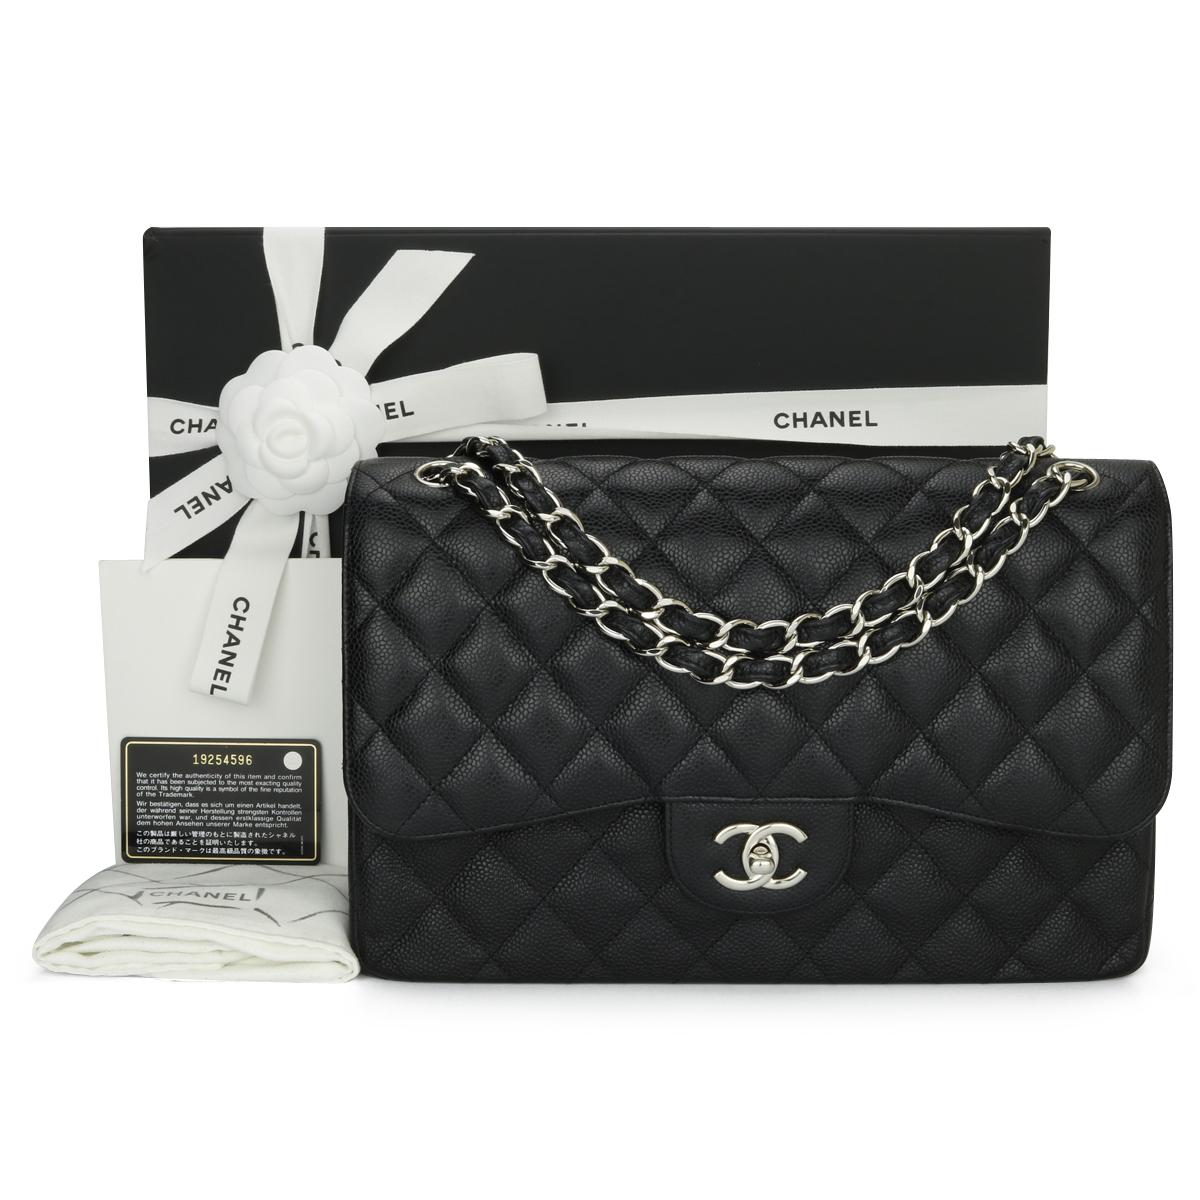 CHANEL Classic Double Flap Jumbo Bag Black Caviar with Silver Hardware 2014.

This stunning bag is in excellent condition, the bag still holds its original shape, and the hardware is still very shiny.

- Exterior Condition: Excellent condition.